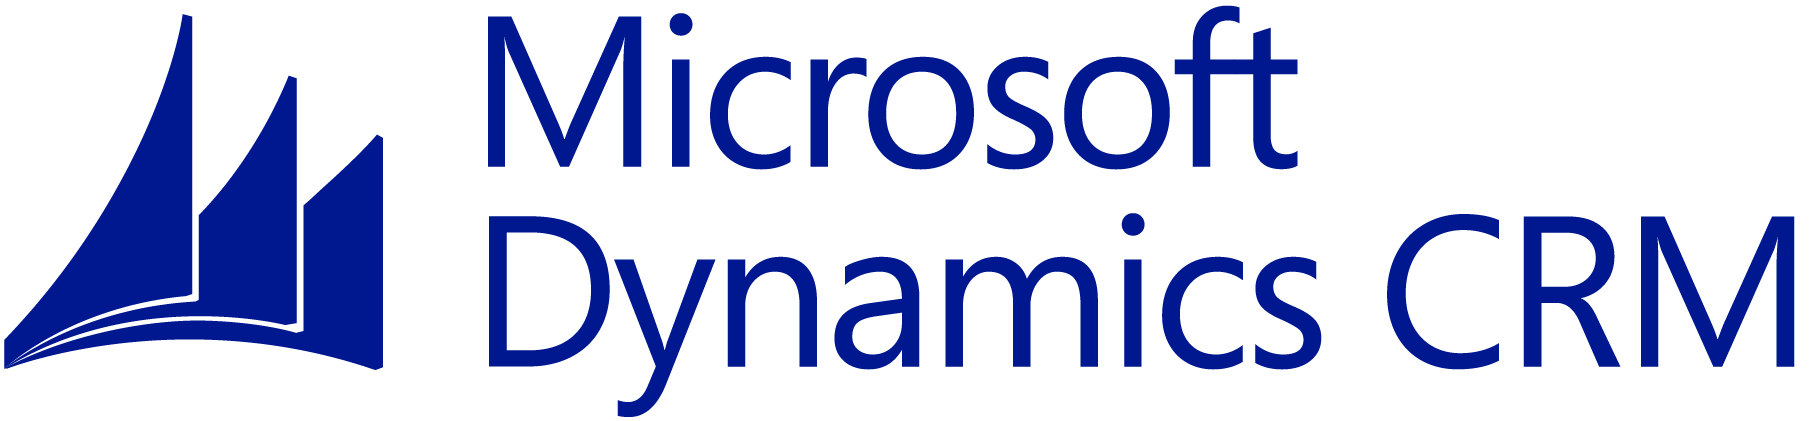 QuoteWerks integration with Microsoft Dynamics CRM